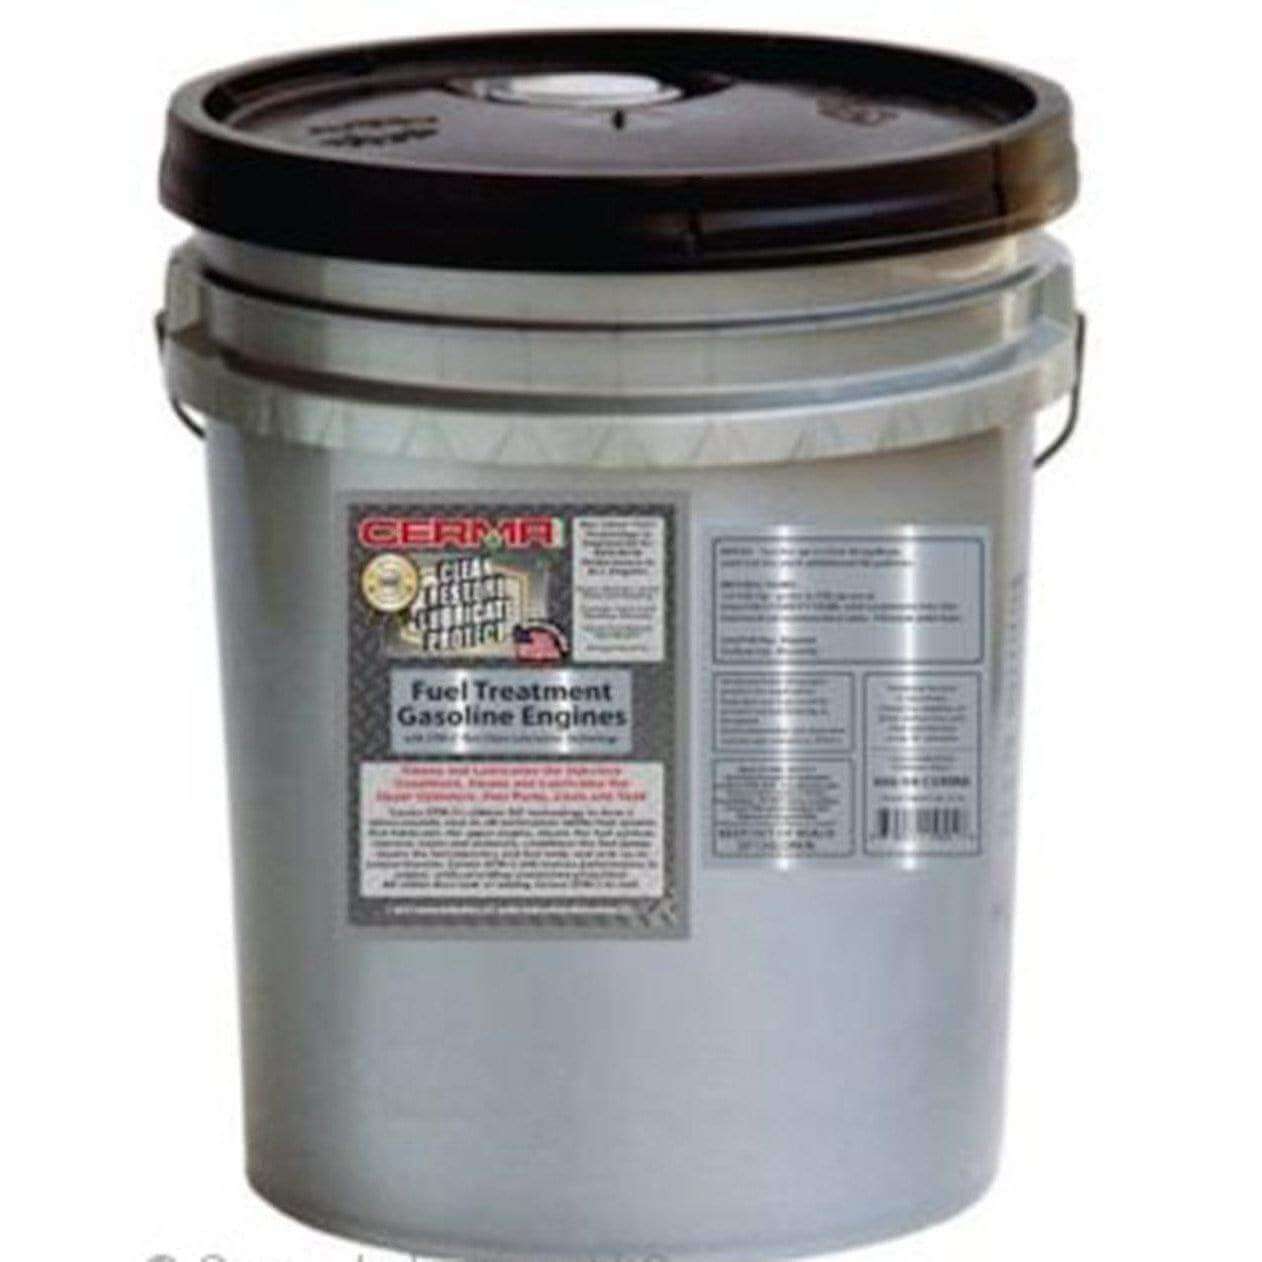 Cerma Ceramic Fuel Treatment for Gasoline Engines at $924.42 only from cermatreatment.com